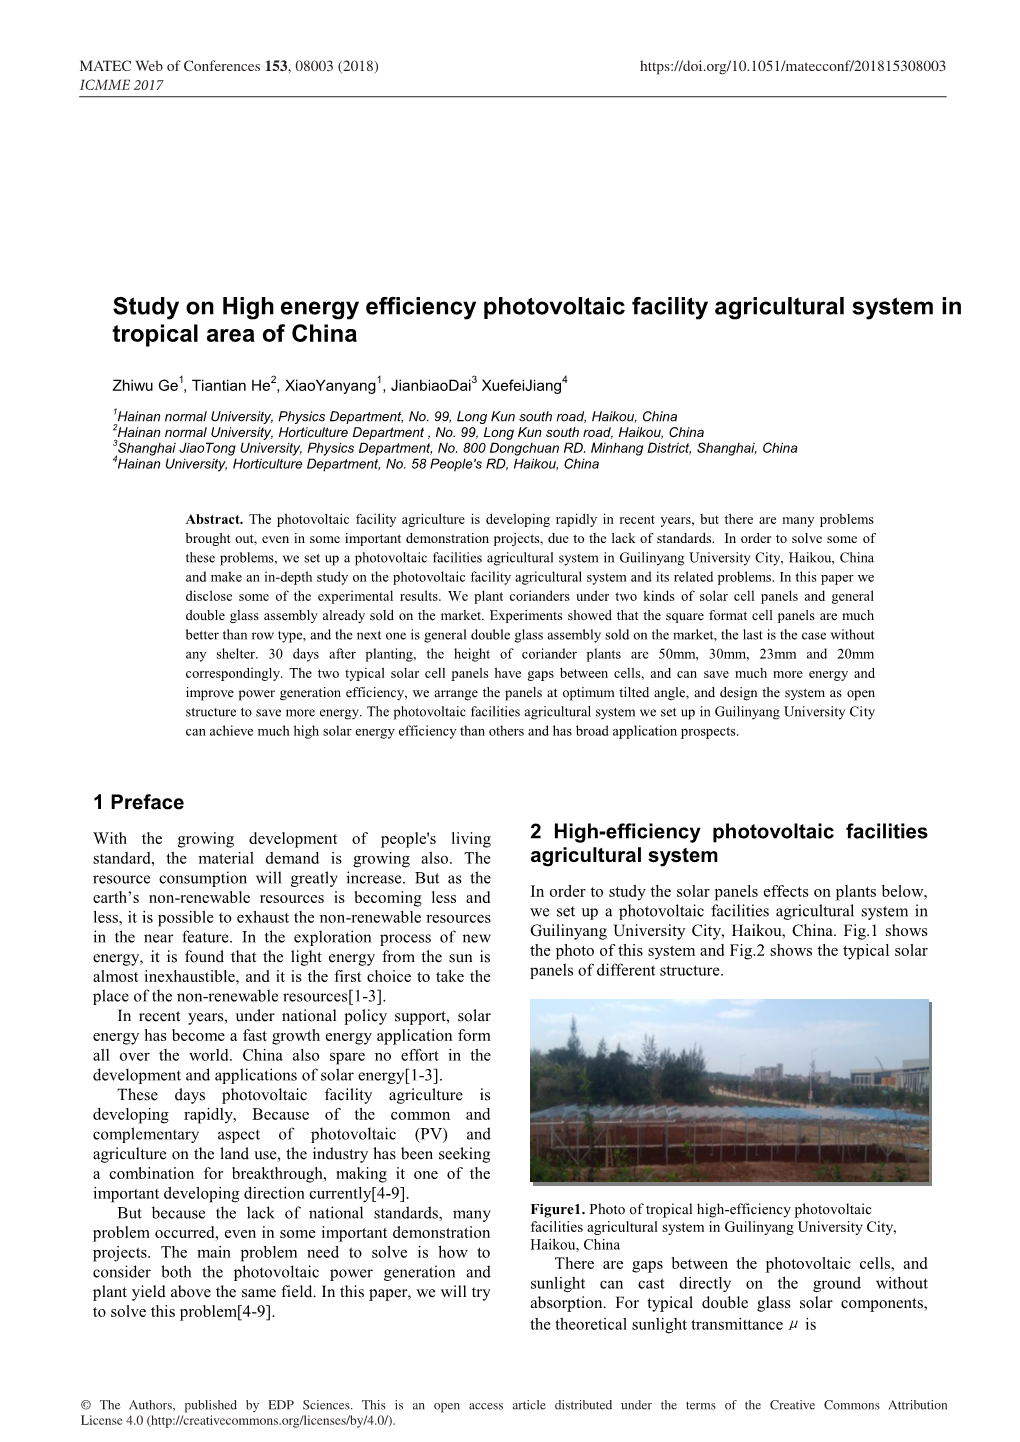 Study on High Energy Efficiency Photovoltaic Facility Agricultural System in Tropical Area of China